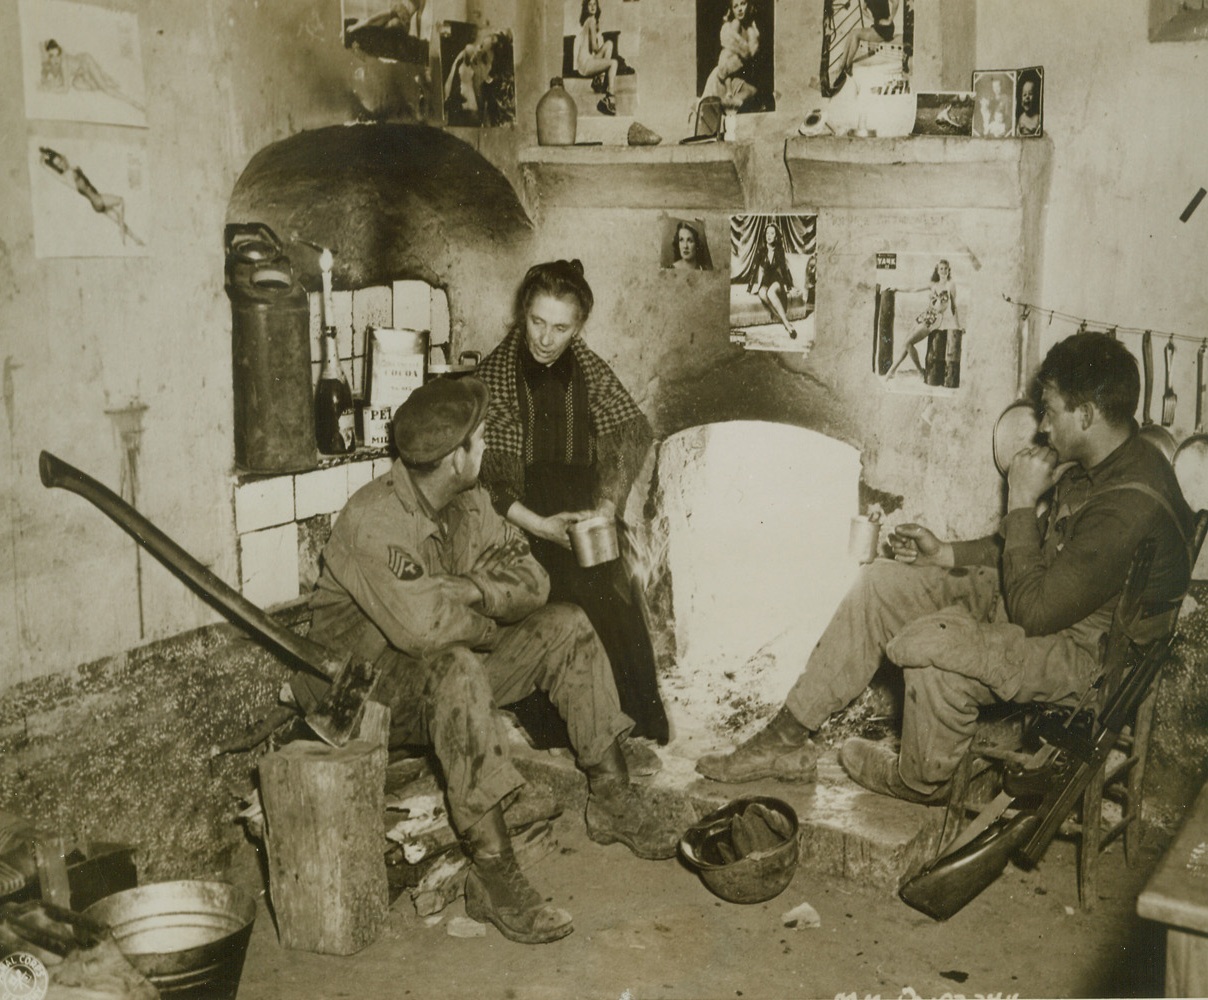 “Home, Sweet Home” in Italy, 4/3/1944. ITALY – Sgt. Vernon Dennis, (left), of Northome, Minn., and Pvt. Harry Boone, (right), of Oneonta, N.Y., warm themselves before the fire in their “home away from home” – the mayor’s house in a tiny Italian village, where the two members of a U.S. Army Photographic unit are quartered. The mayor’s wife, (center), has done her best to make the lads comfortable and has even allowed them to display their favorite collection of pinup girls on the walls and over the fireplace.Credit Line (U.S. Army Official Photo from Acme);